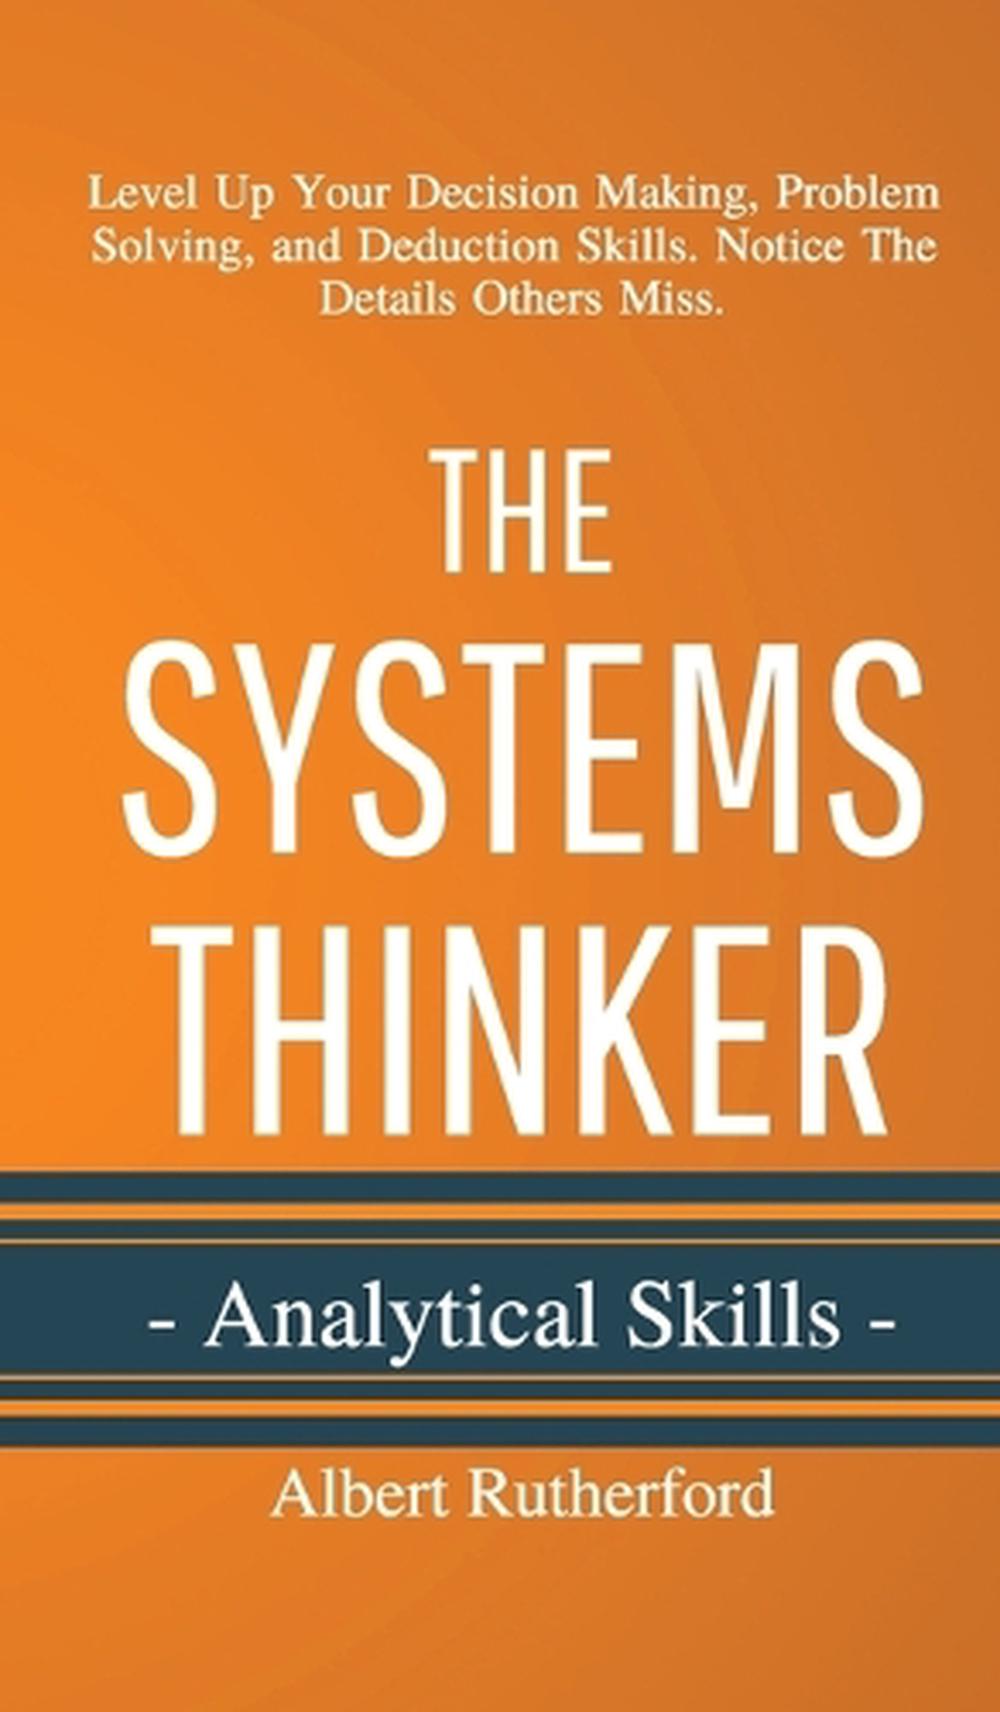 The Systems Thinker - Analytical Skills: Level Up Your Decision Making ...